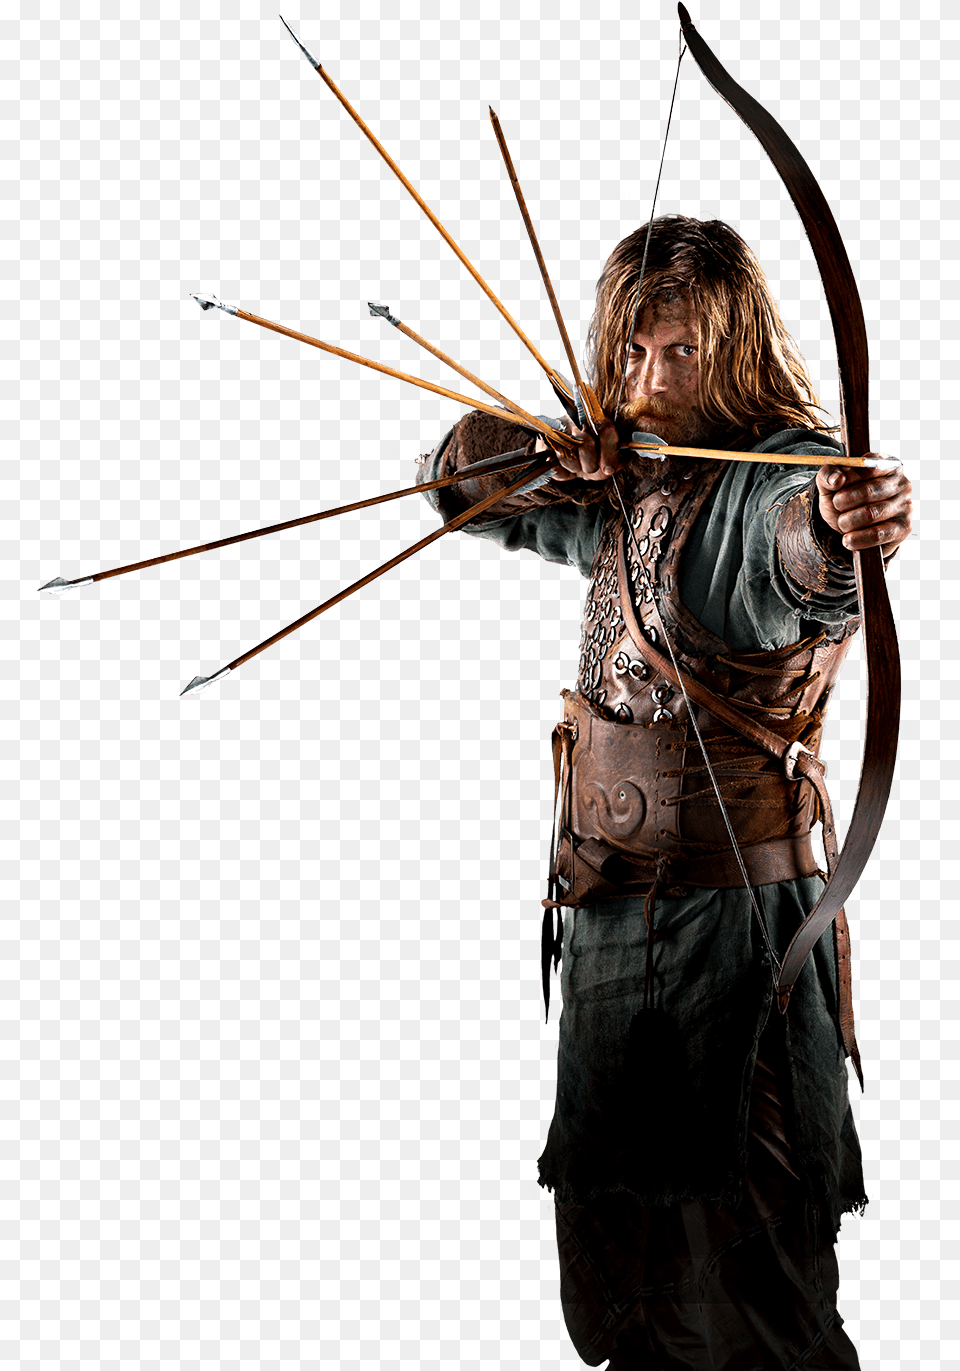 Bow And Arrow Viking, Archery, Sport, Weapon, Archer Png